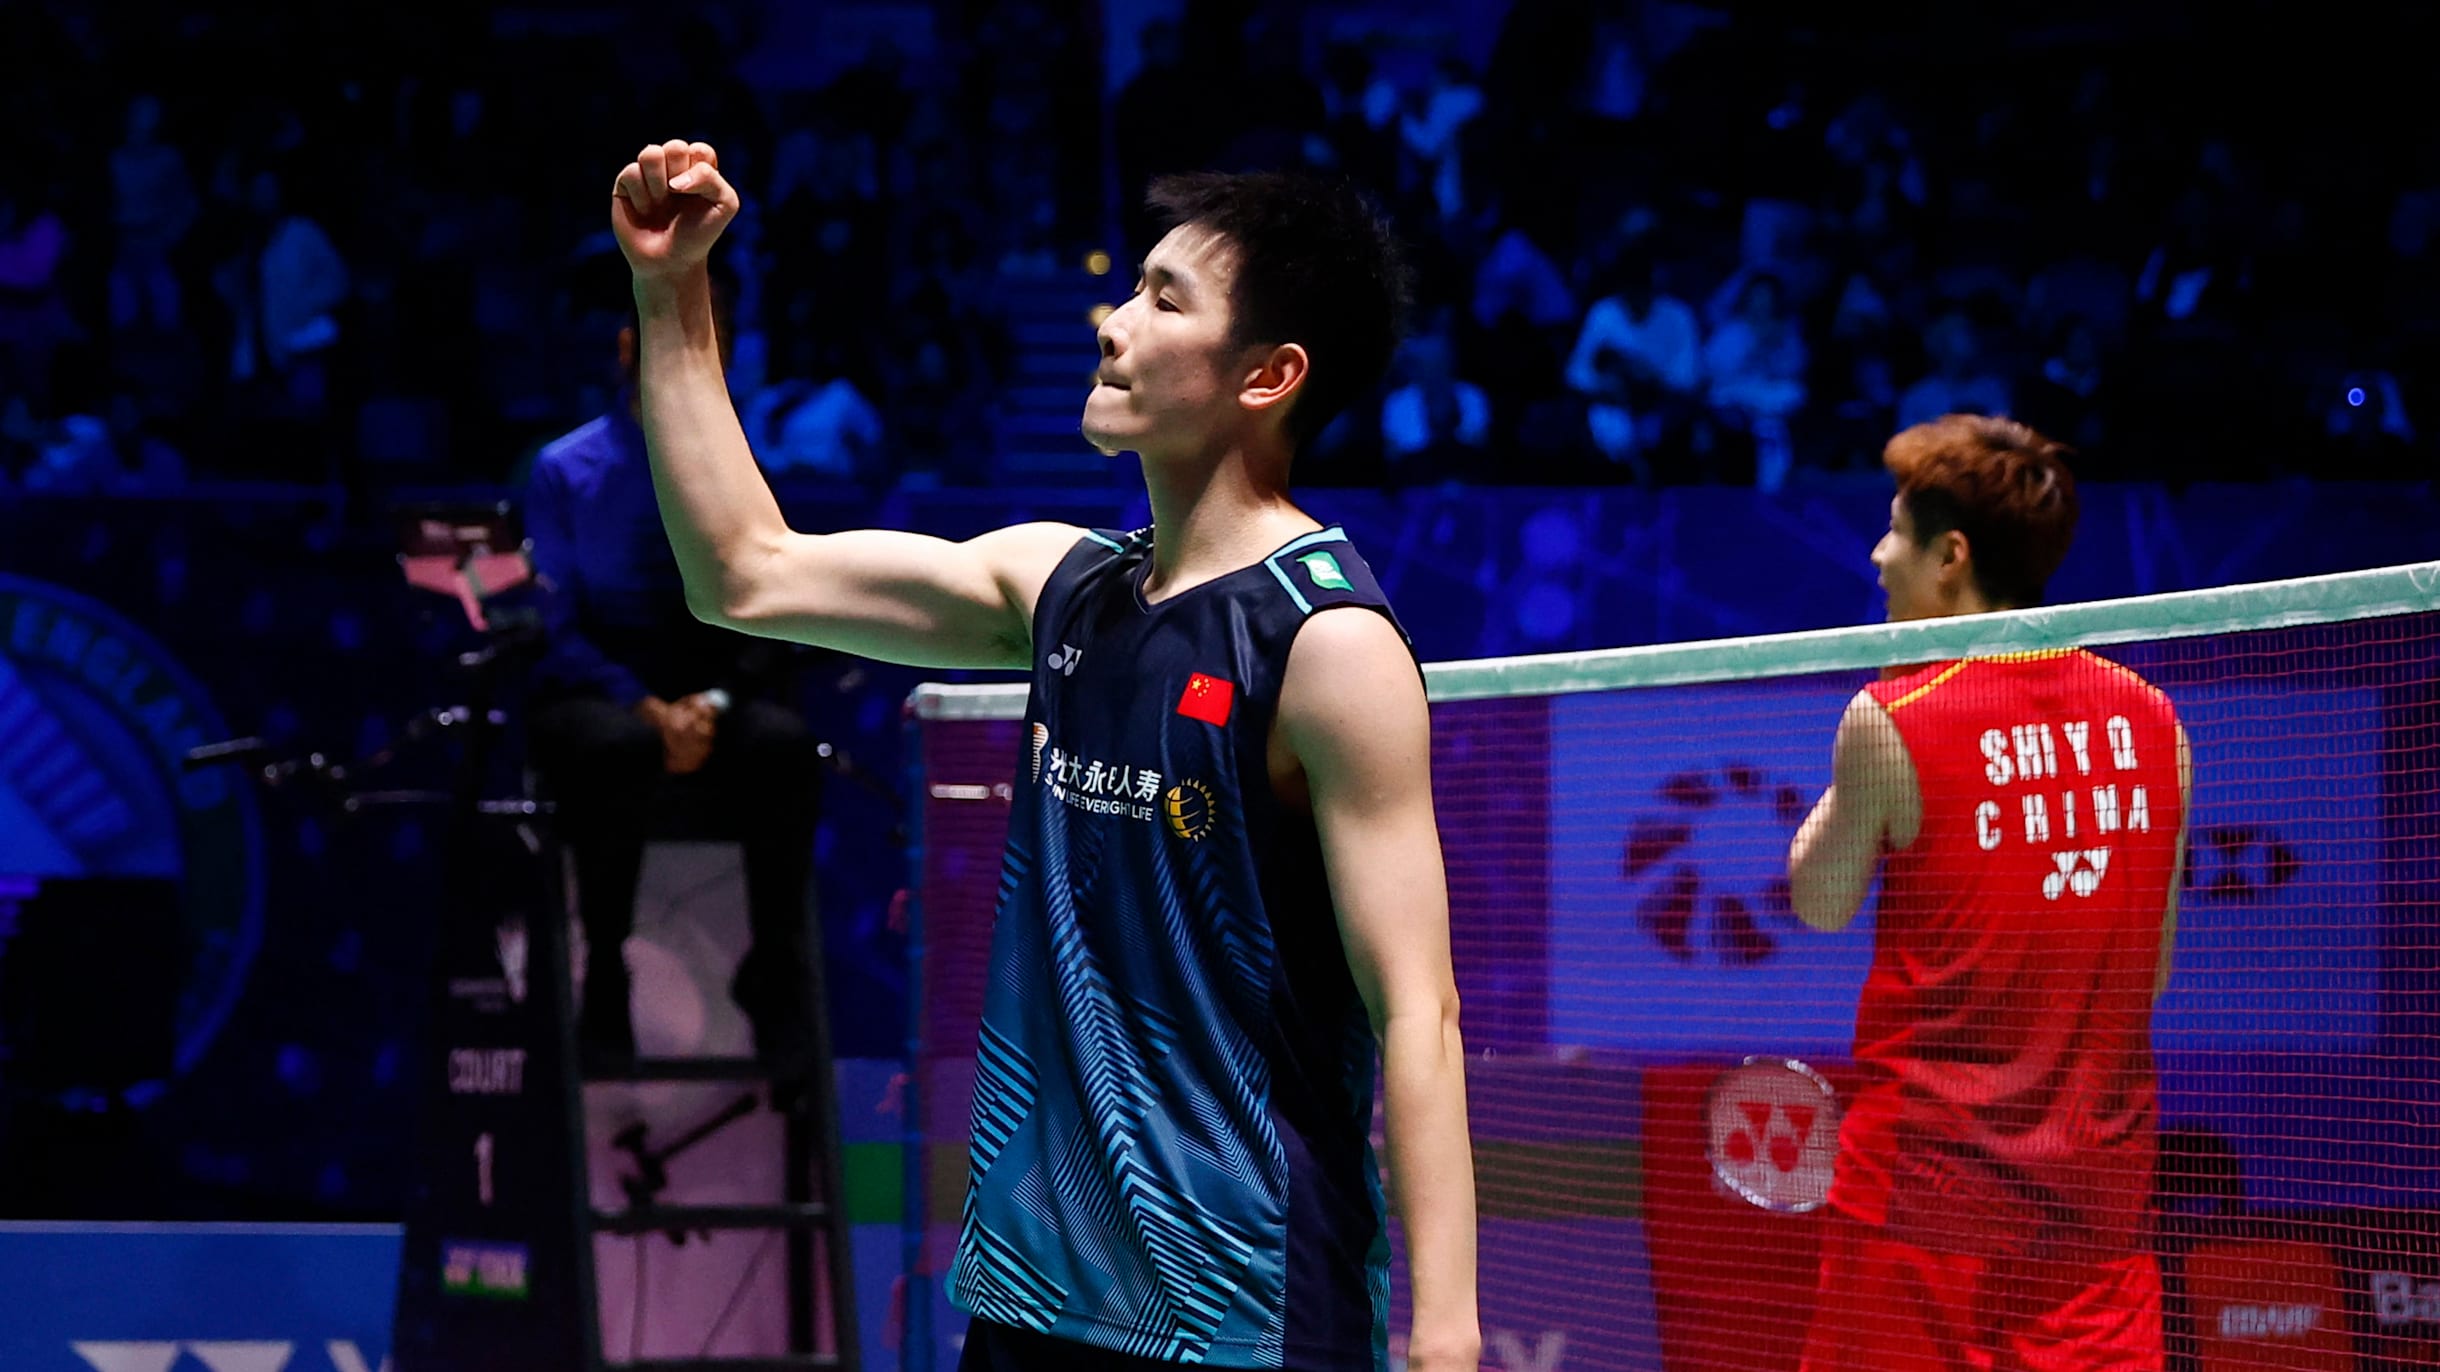 All England Open 2023 Badminton Li Shifeng and An Se-young win singles finals in Birmingham